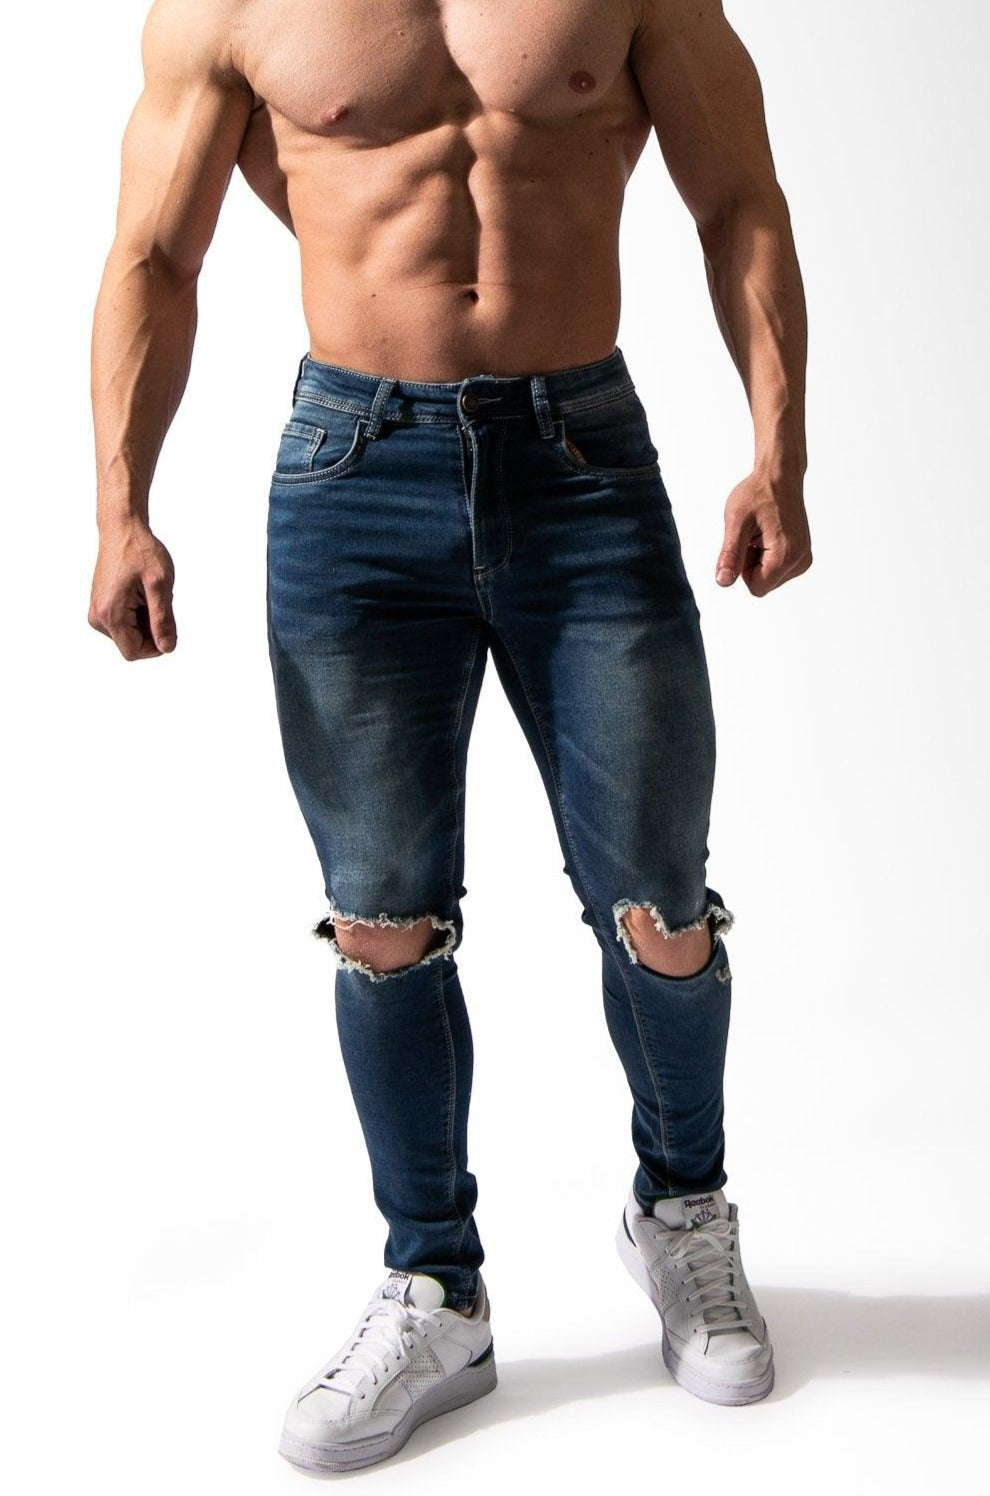 Denim Jeans for Men | Bodybuilding Fitness & Casual Wear Jed North